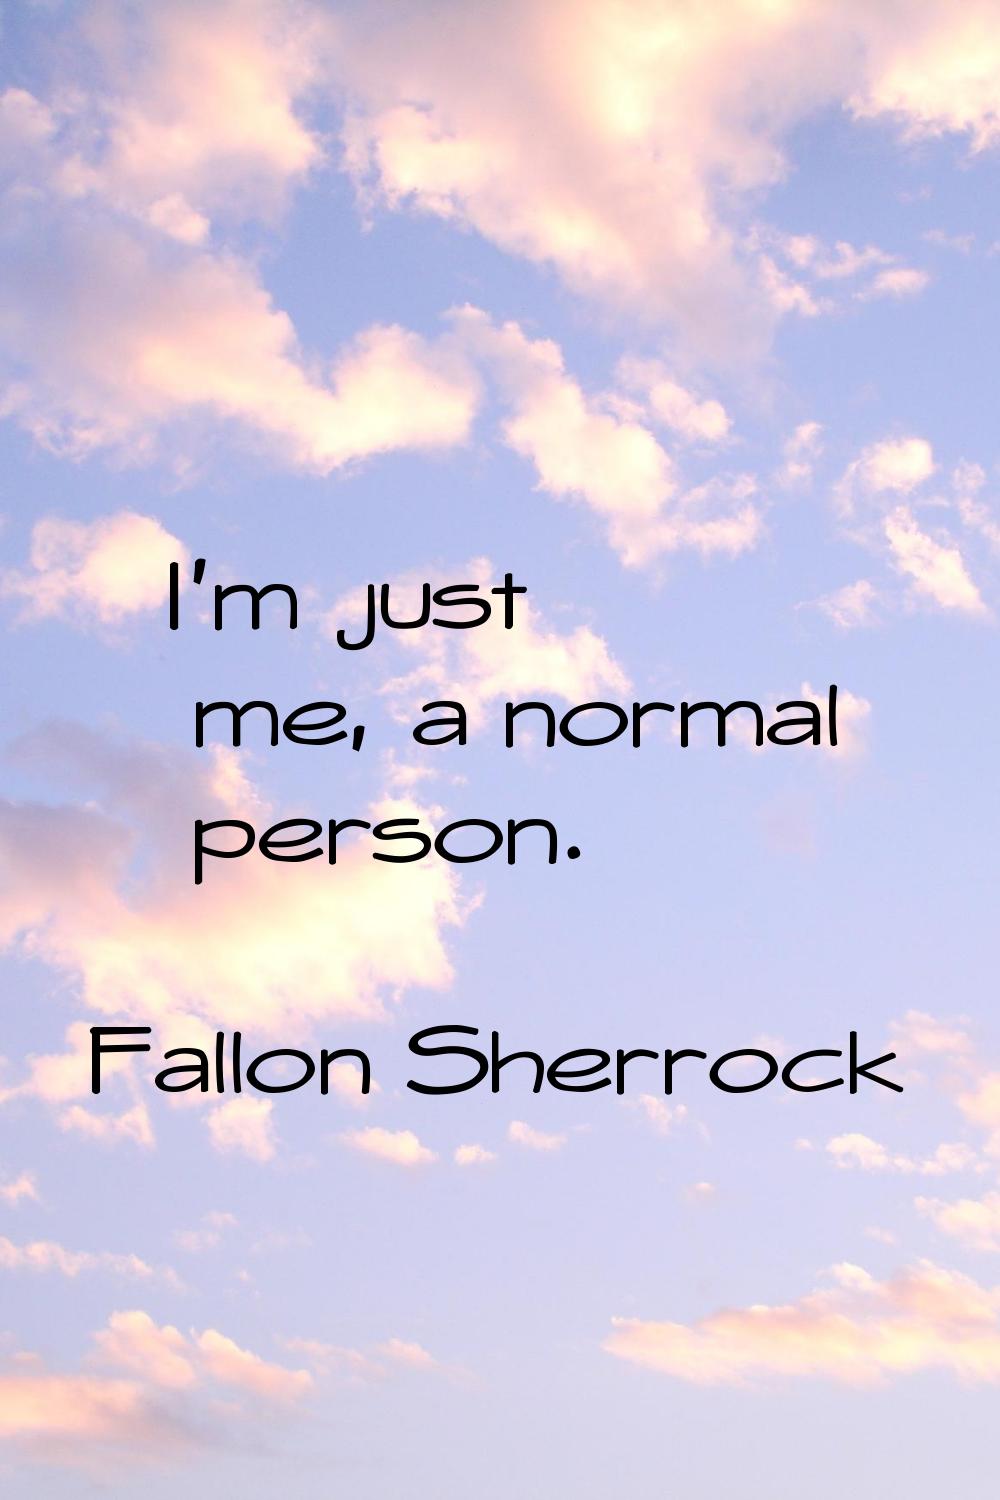 I'm just me, a normal person.